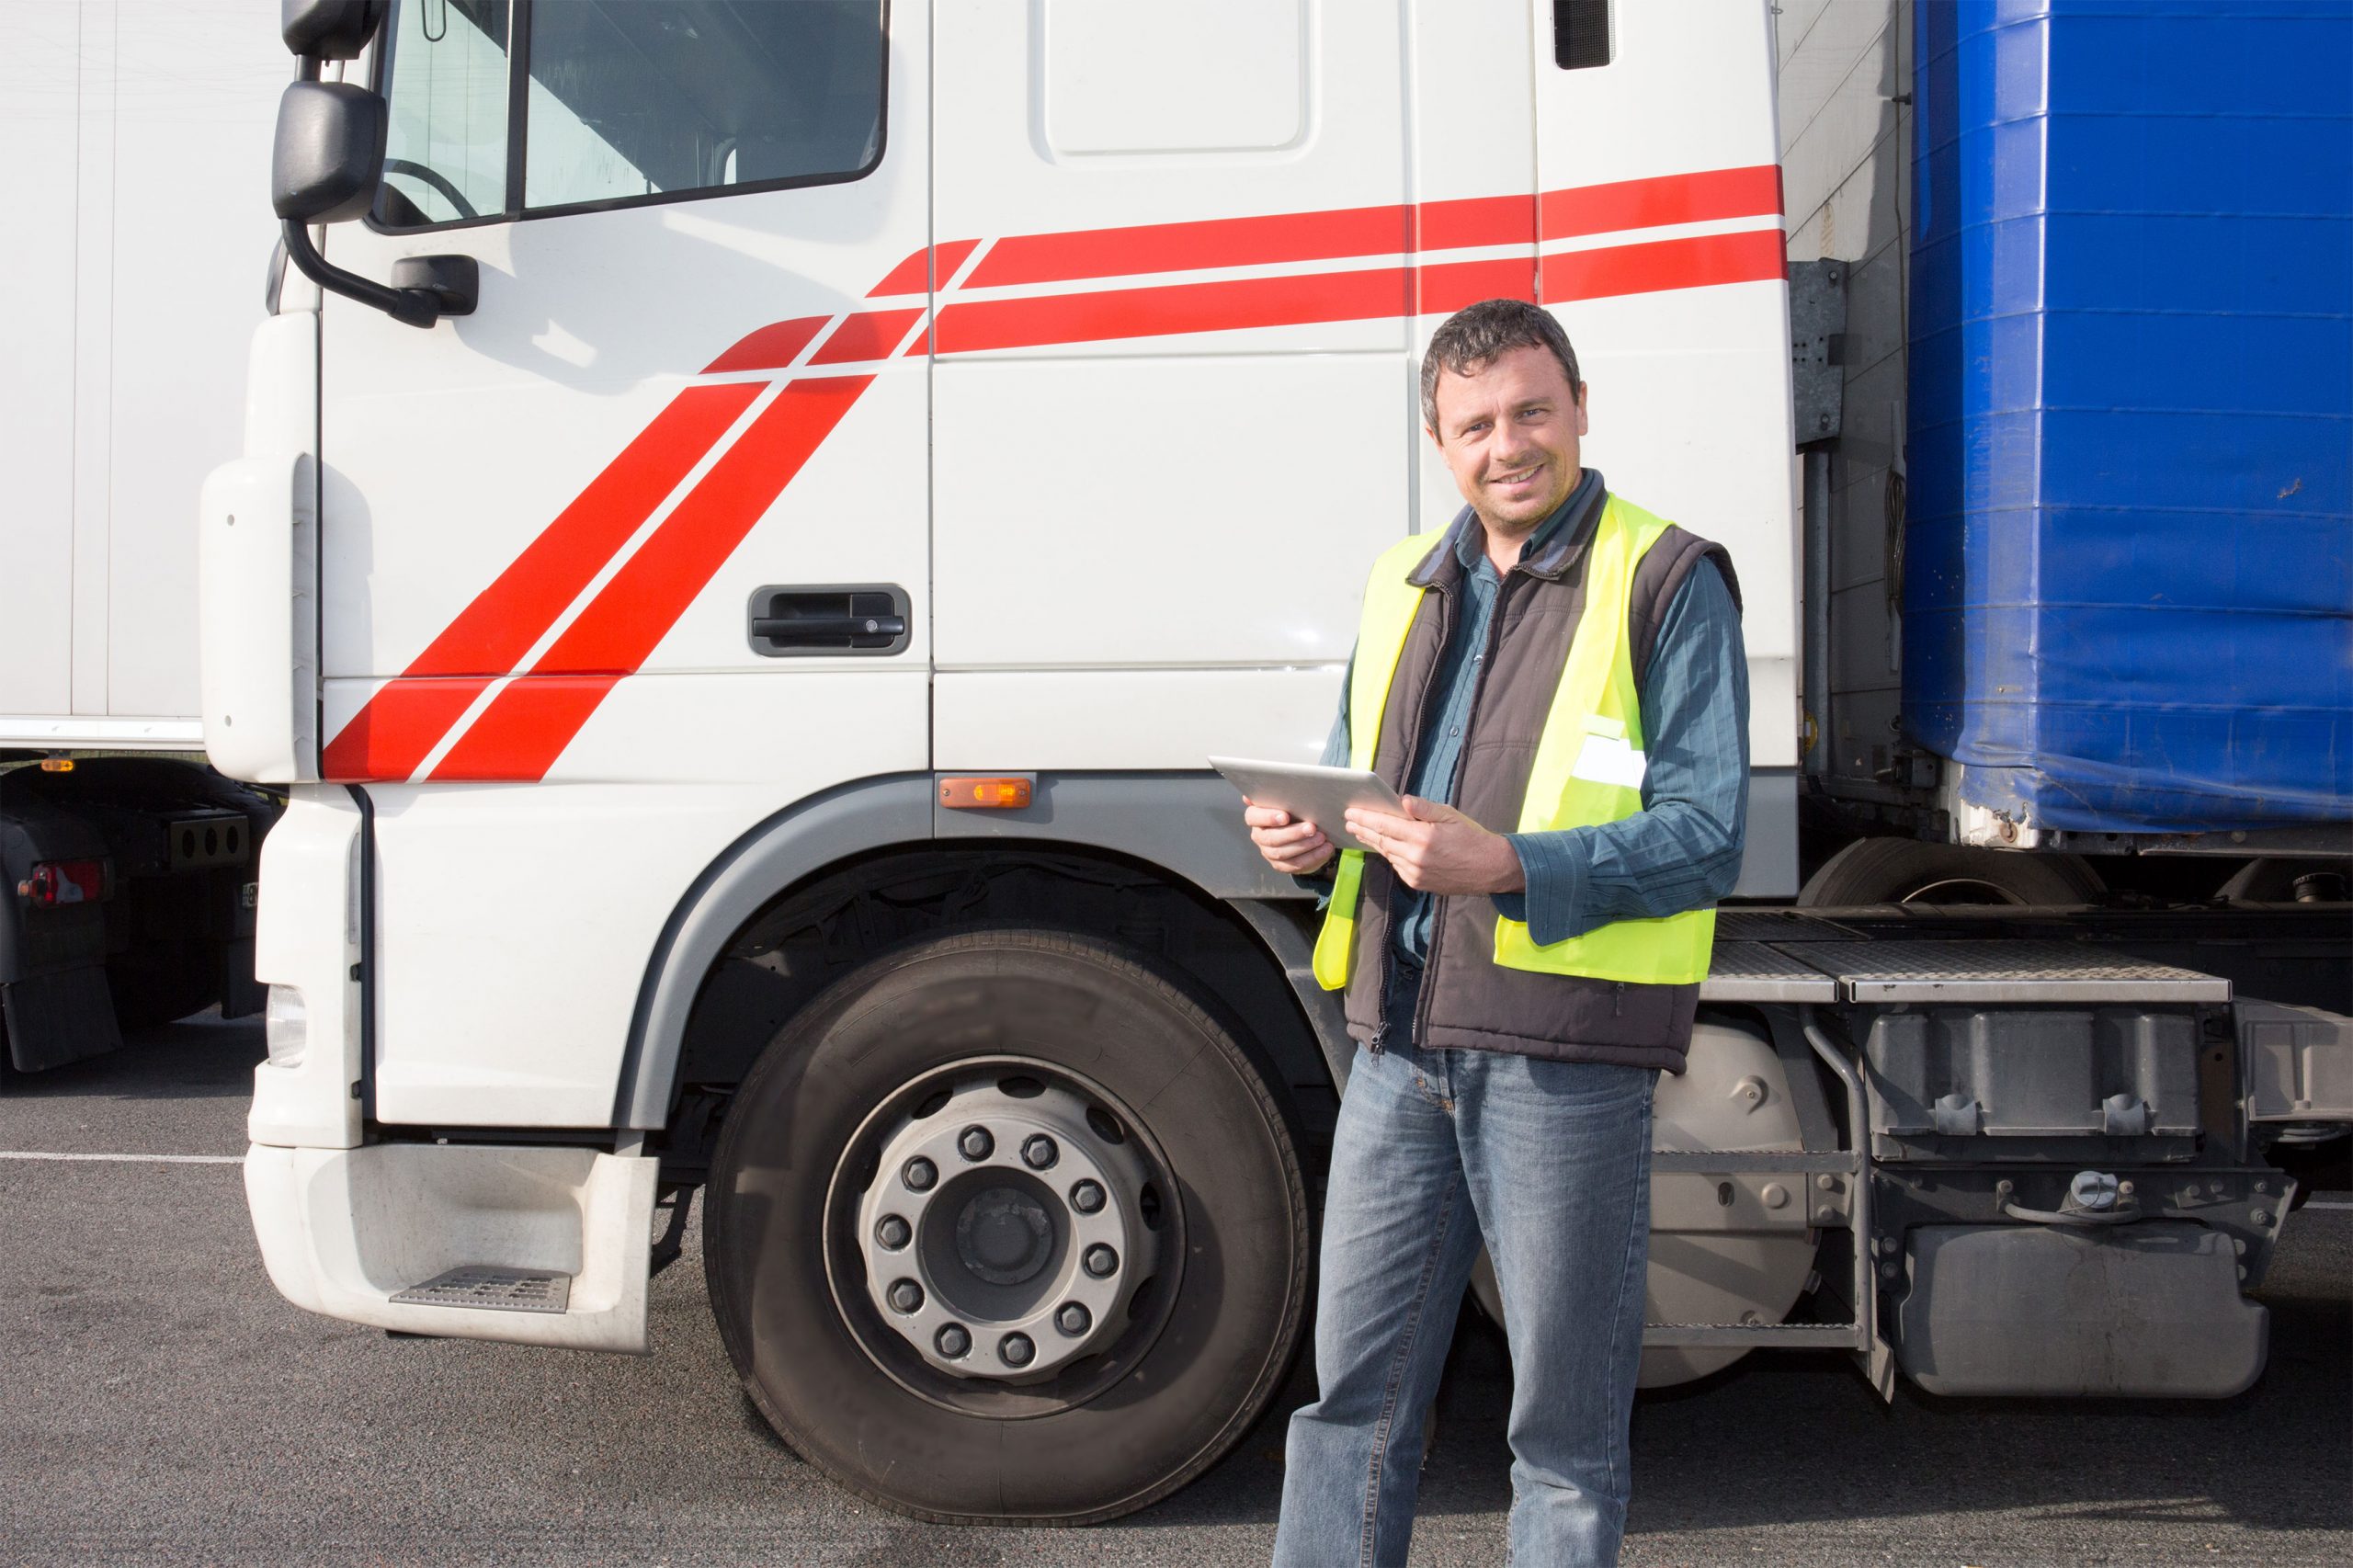 How can your drivers make the best first impression?